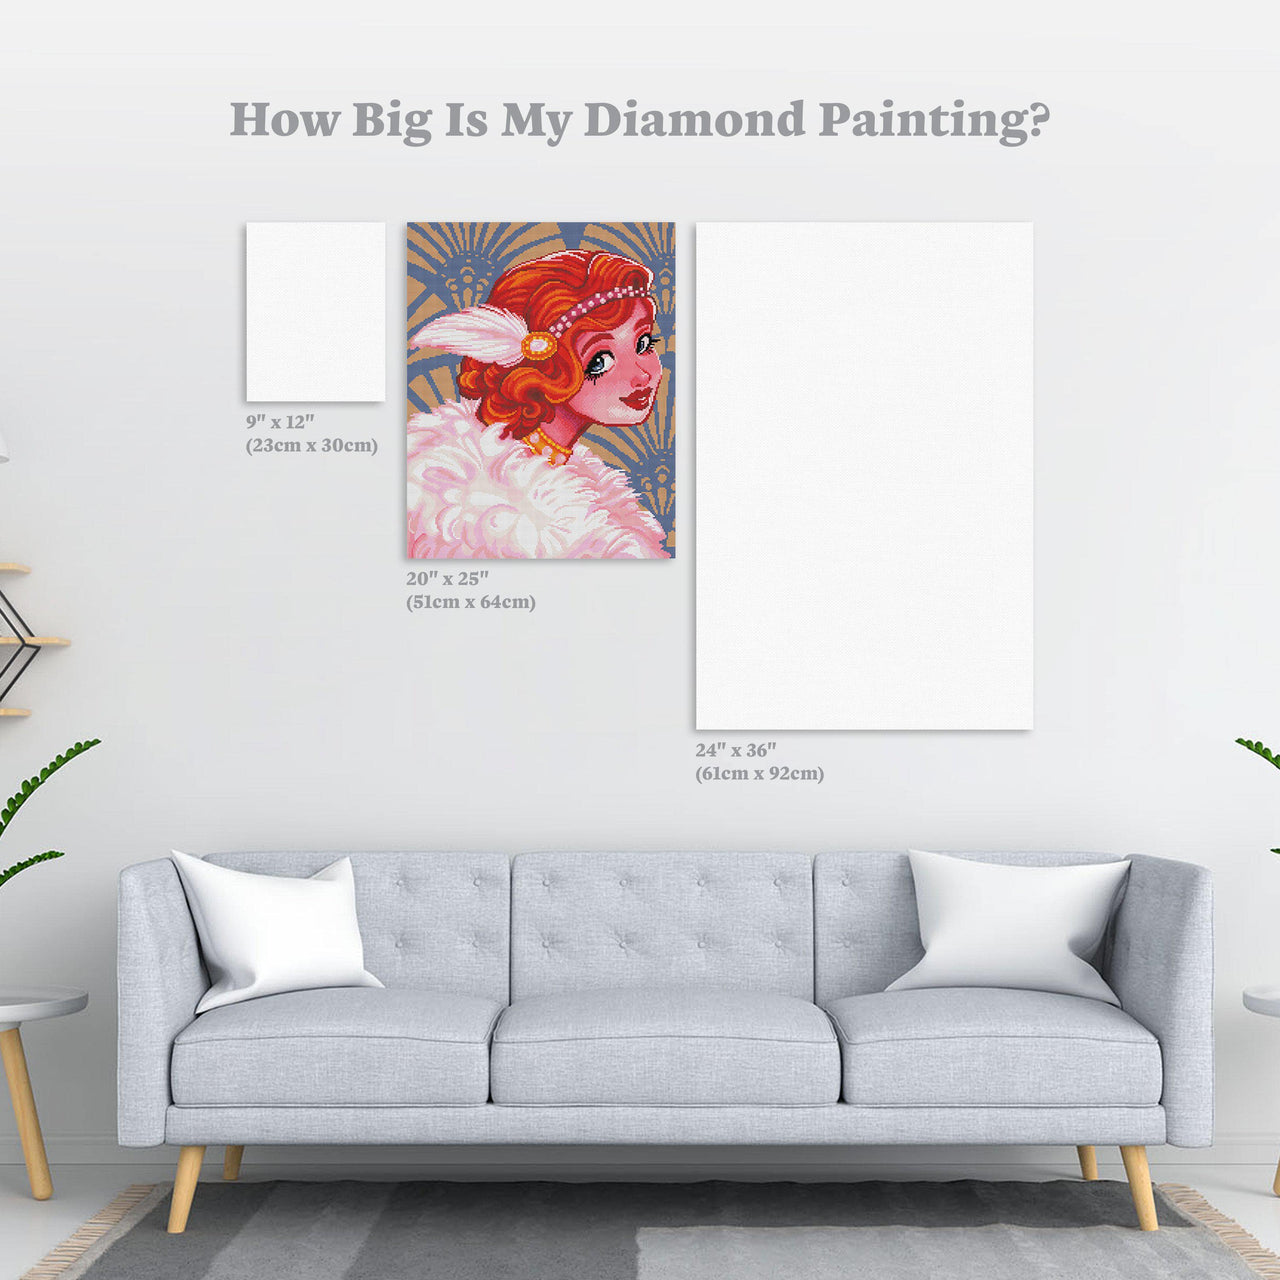 Diamond Painting Roarin 20's 20" x 25″ (51cm x 64cm) / Round with 25 Colors including 2 ABs